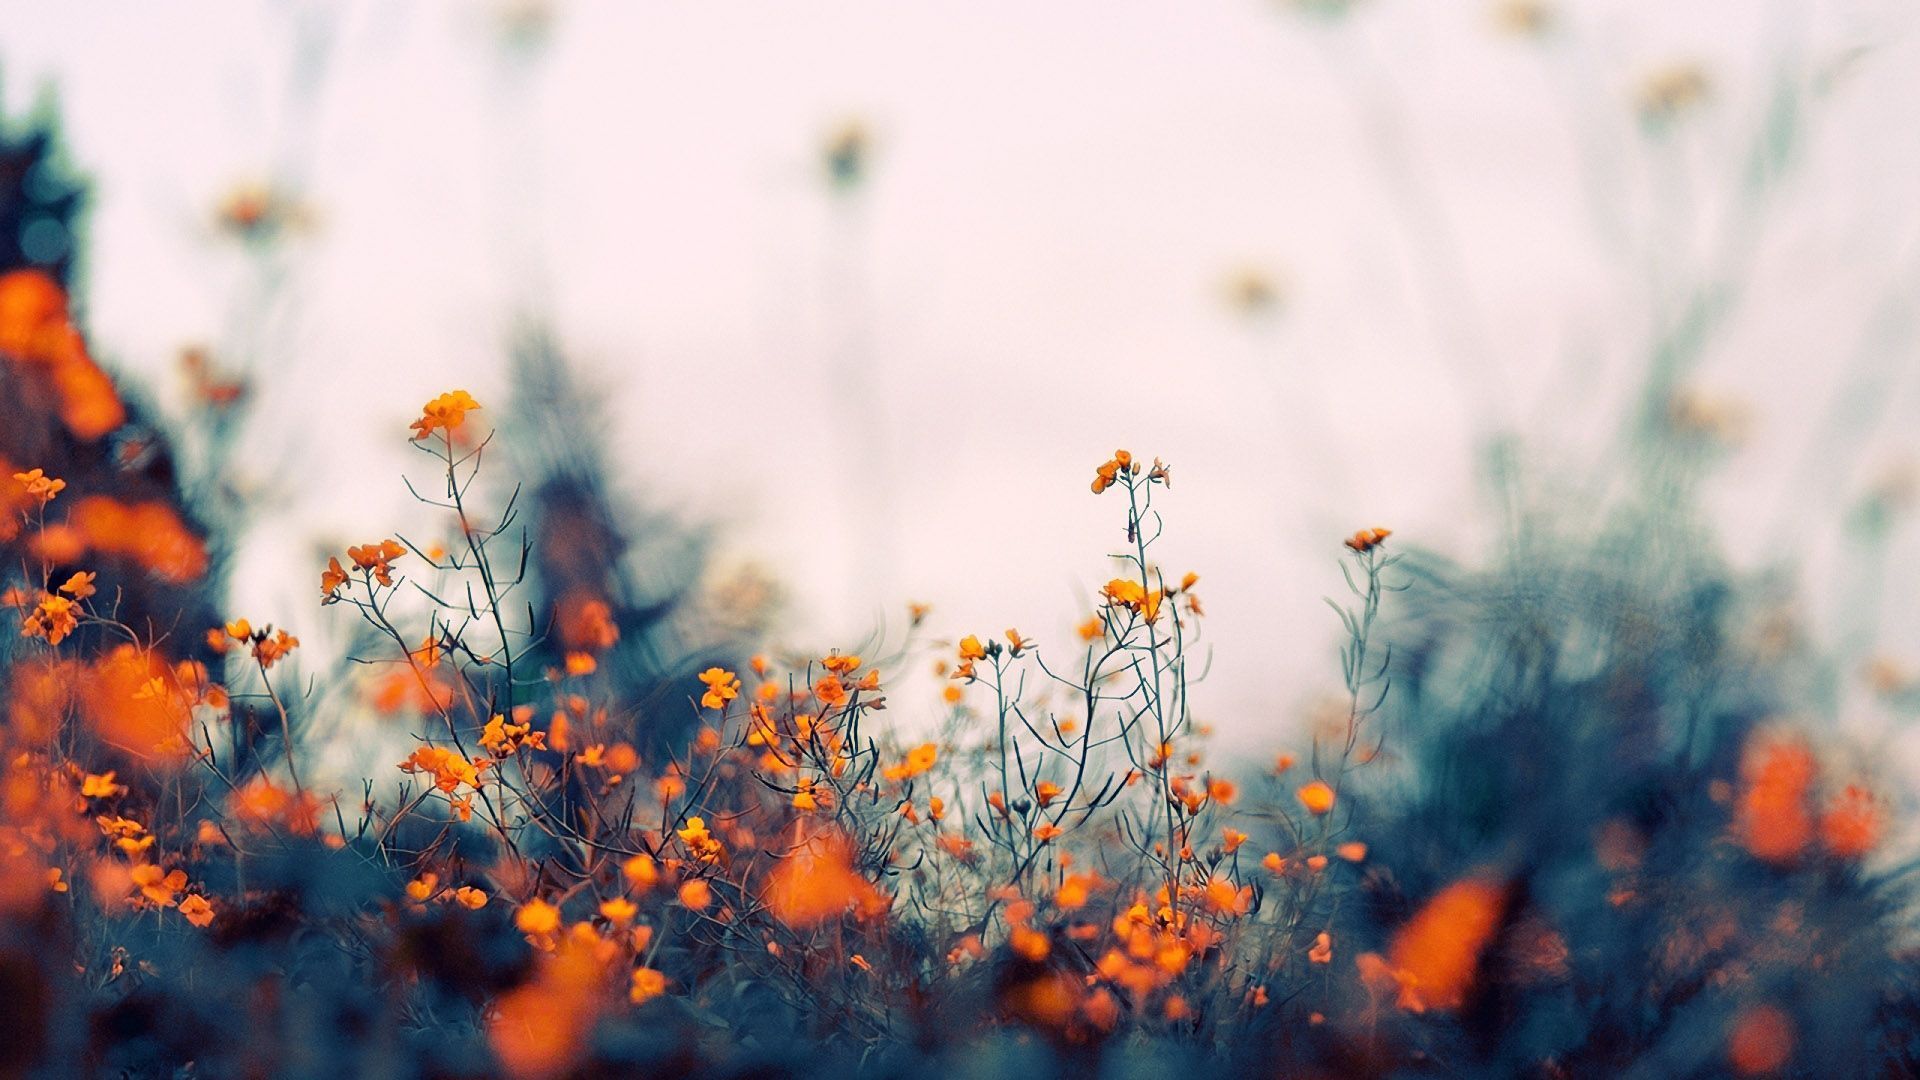 A field of orange flowers with a white sky in the background. - Photography